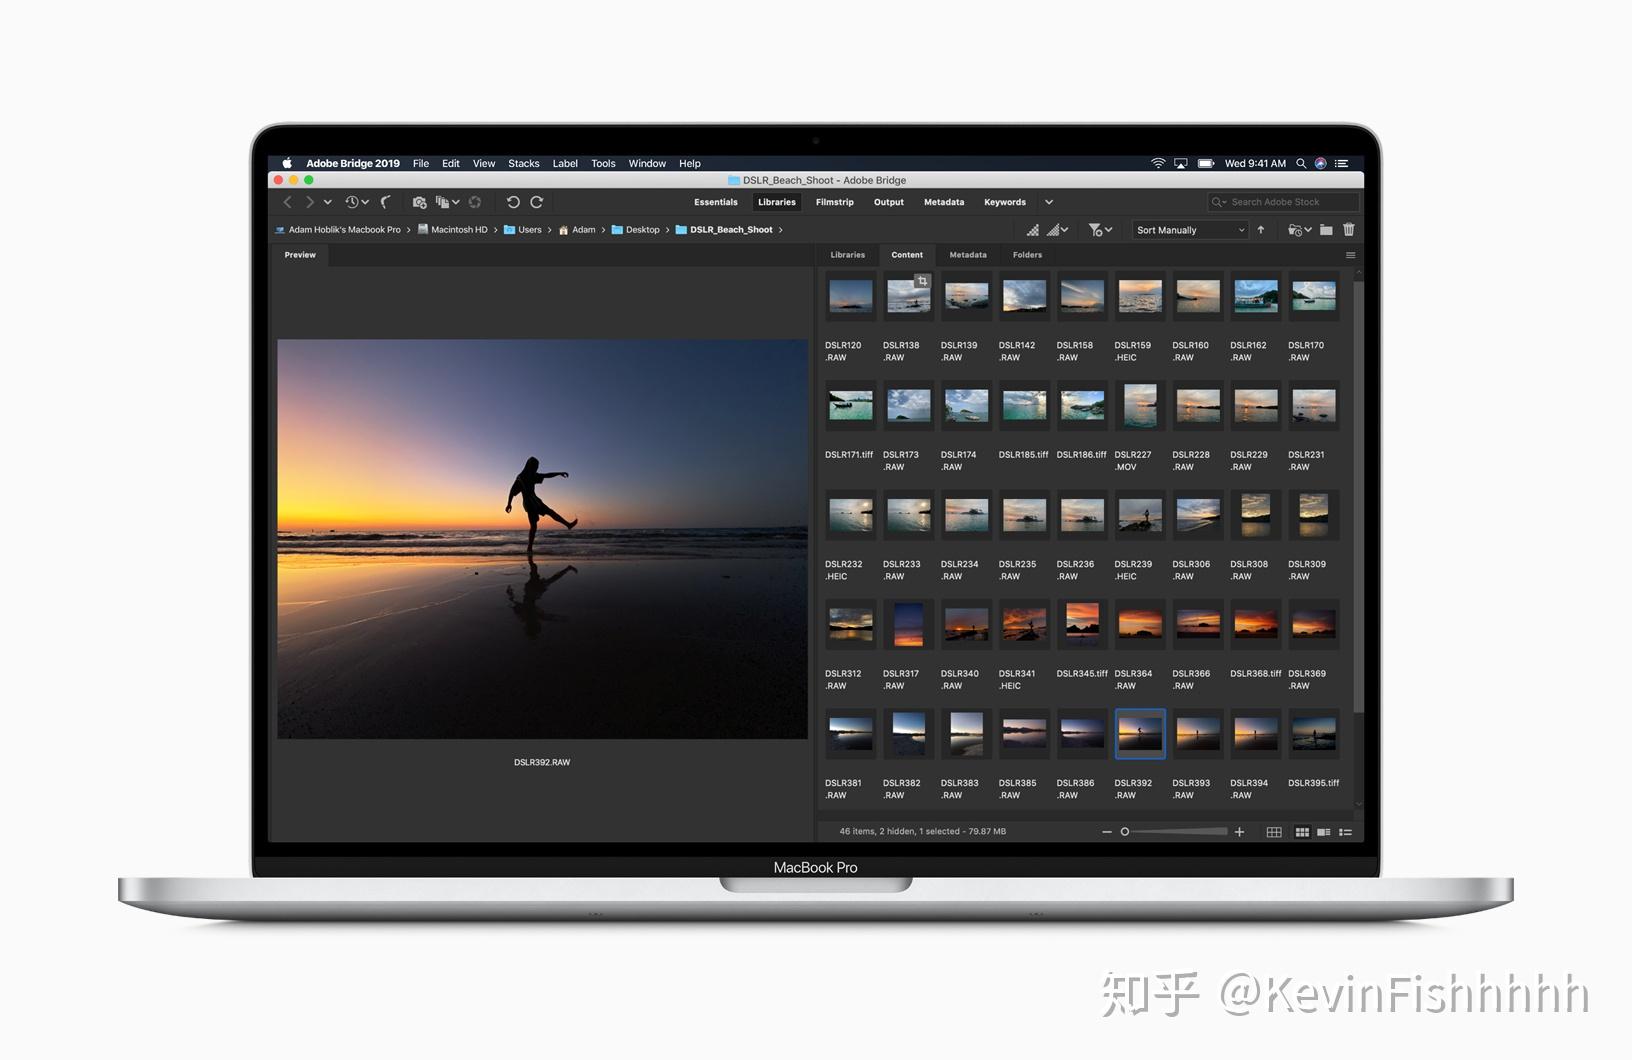 ImageRanger Pro Edition for Mac(图片管理器) - 知乎